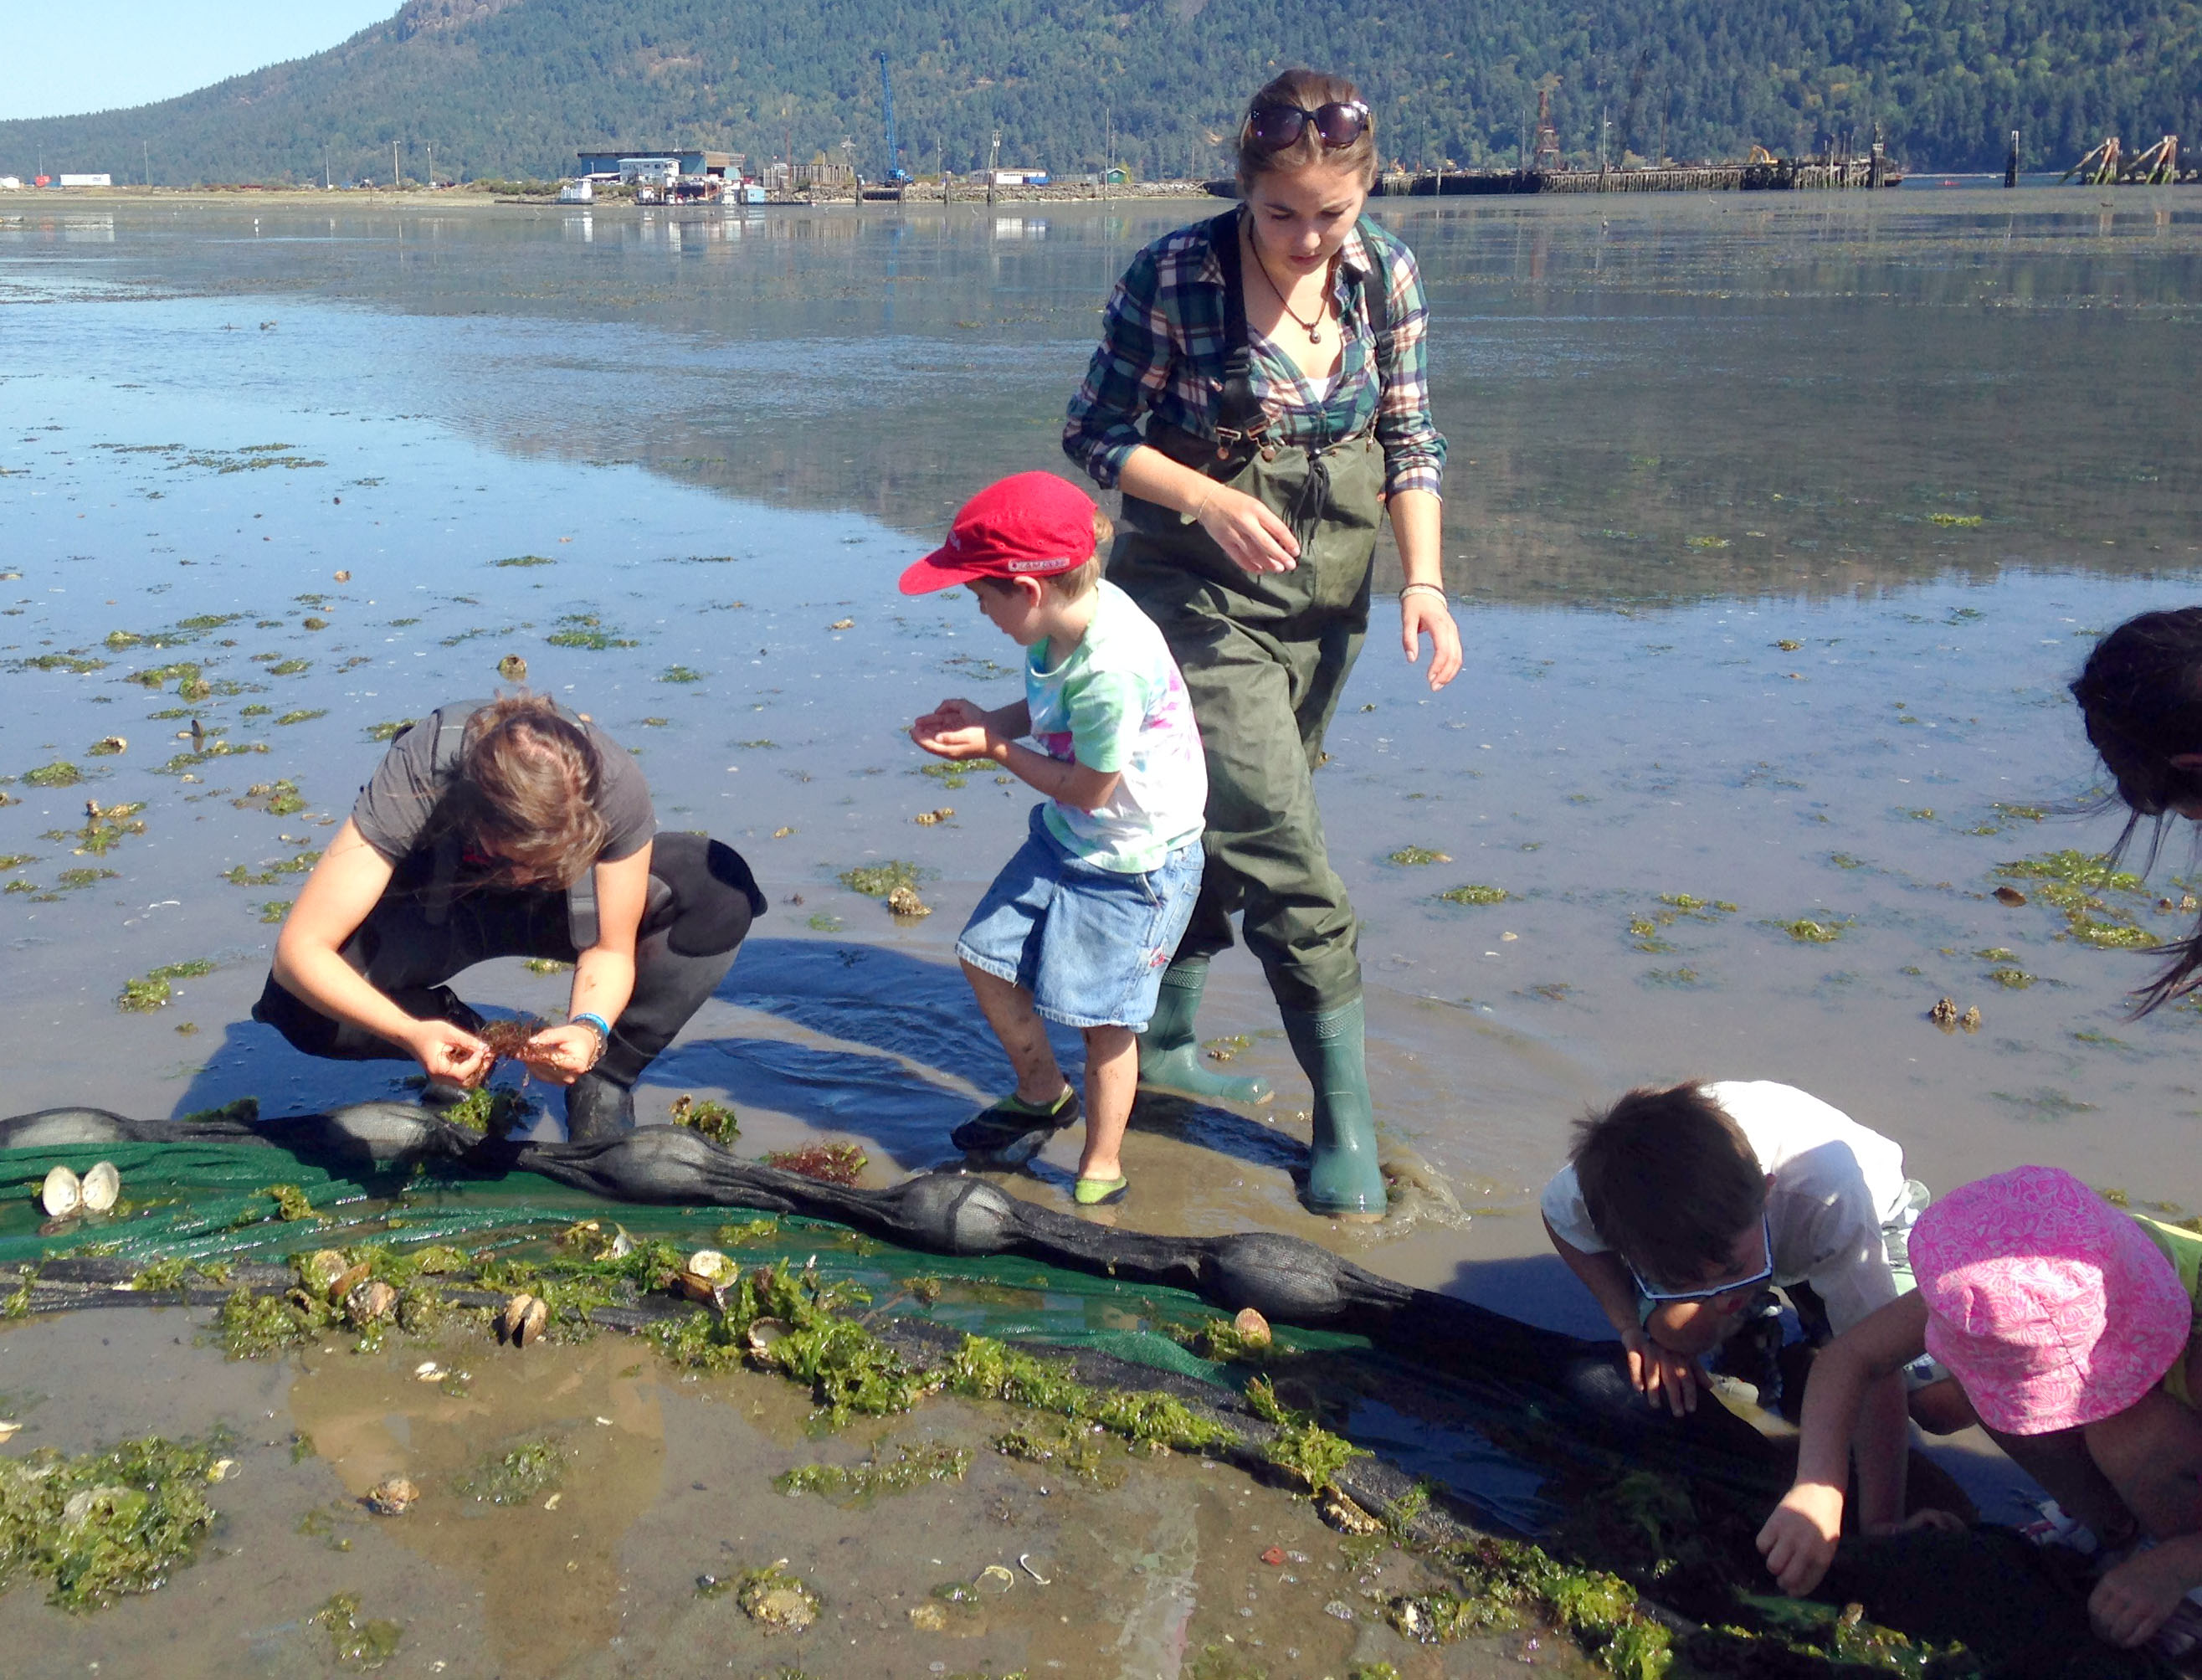 Contract Educator positions – hands-on nature & science programs – Apply by March 30th